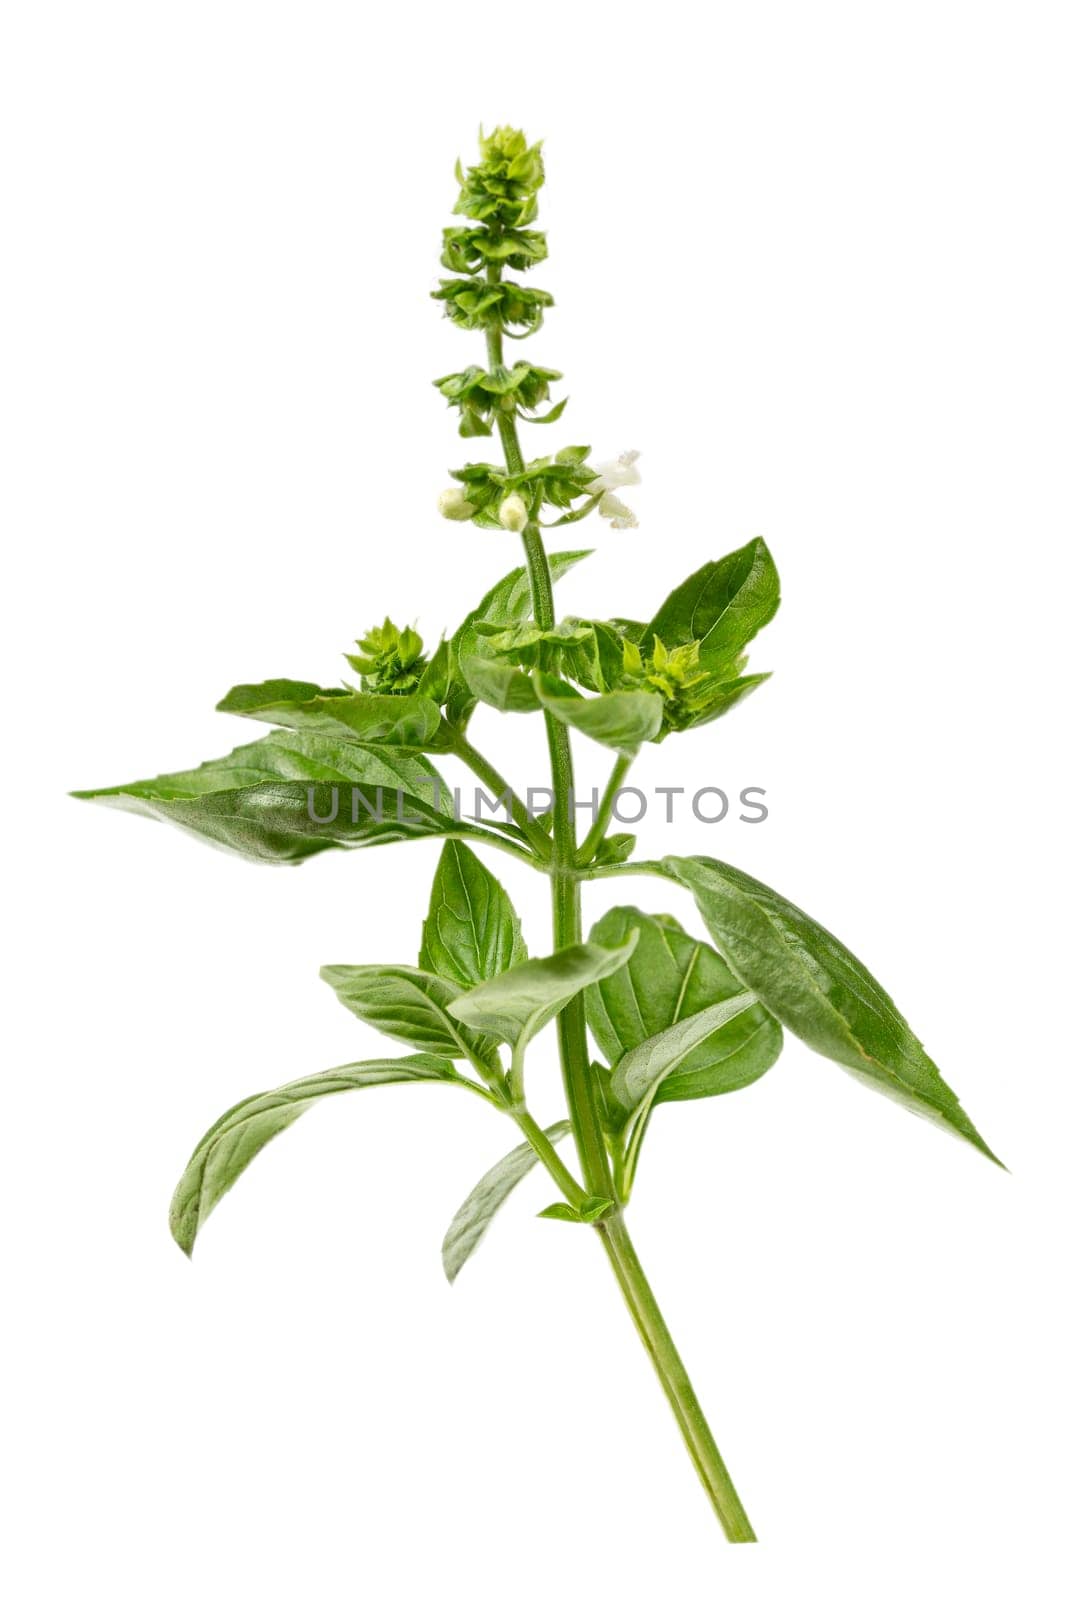 Branch of fresh green sweet basil, Genovese basil, Ocimum basilicum, a culinary herb family Lamiaceae isolated on white by JPC-PROD